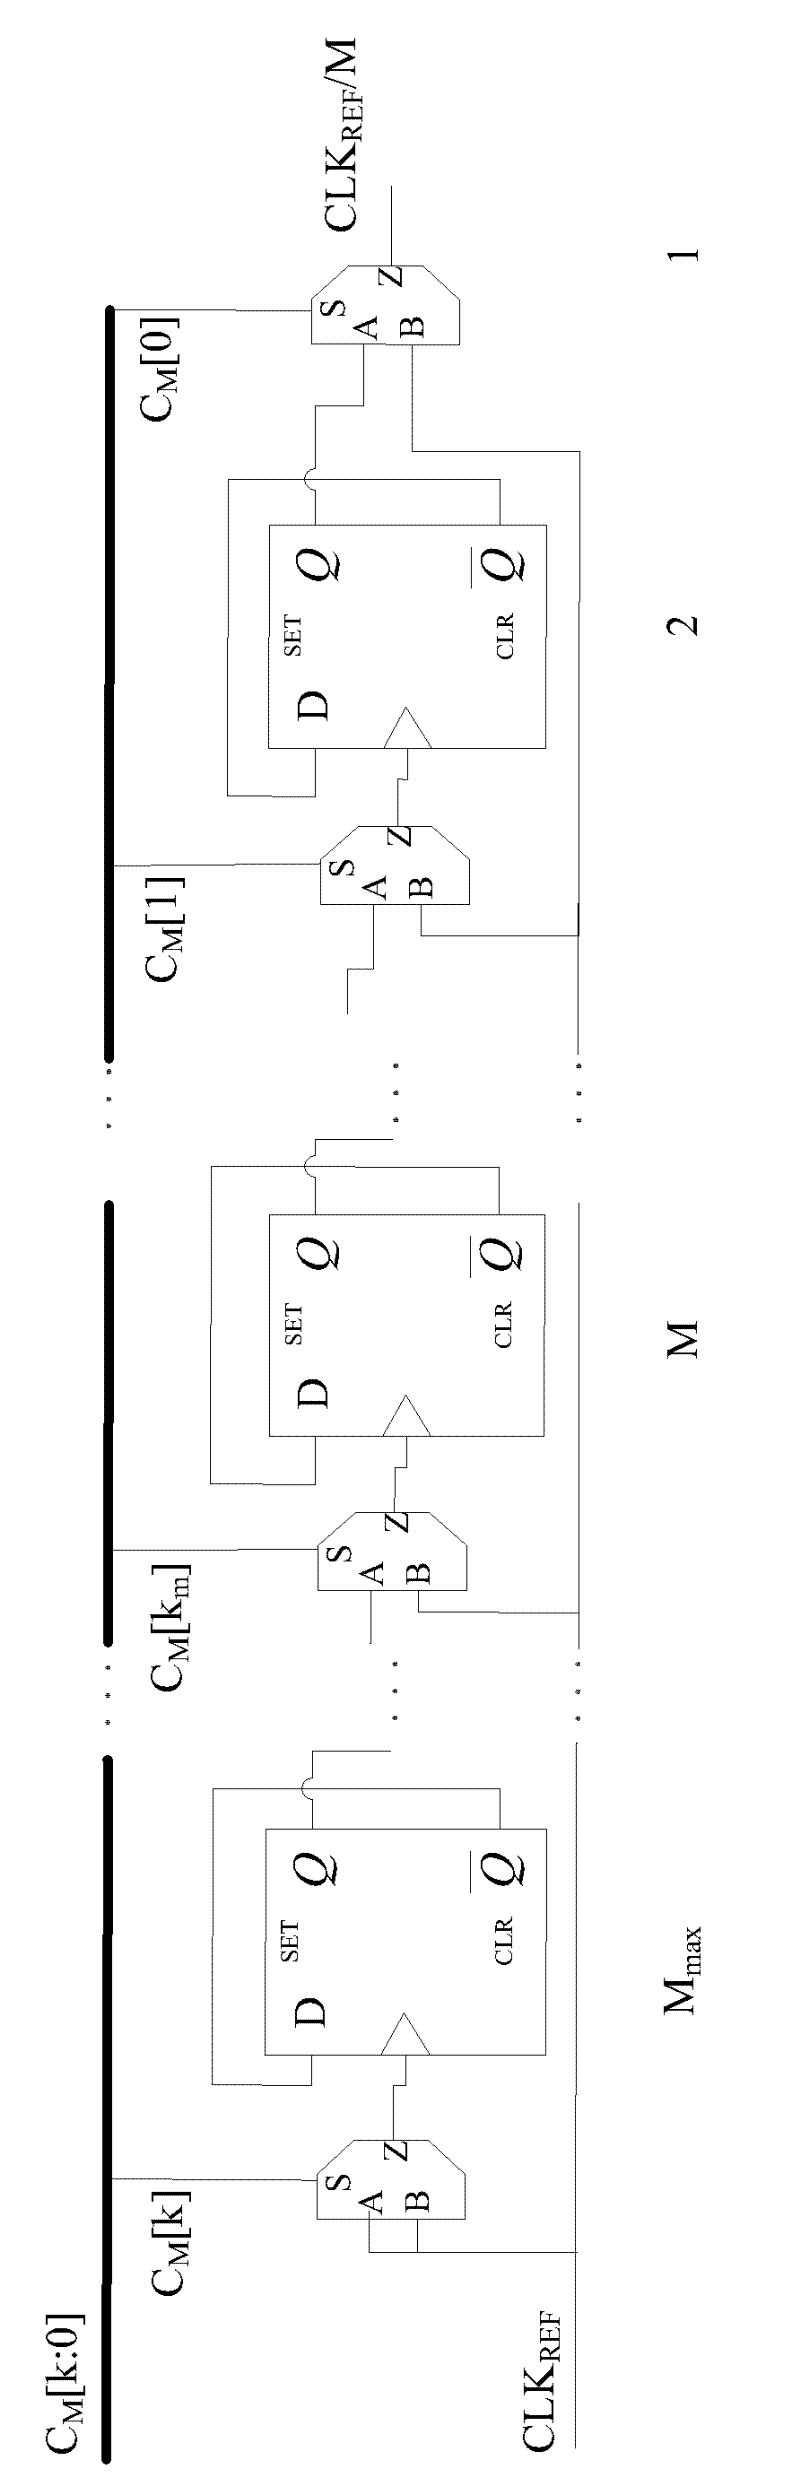 A lock detection circuit with programmable lock precision and lock frequency